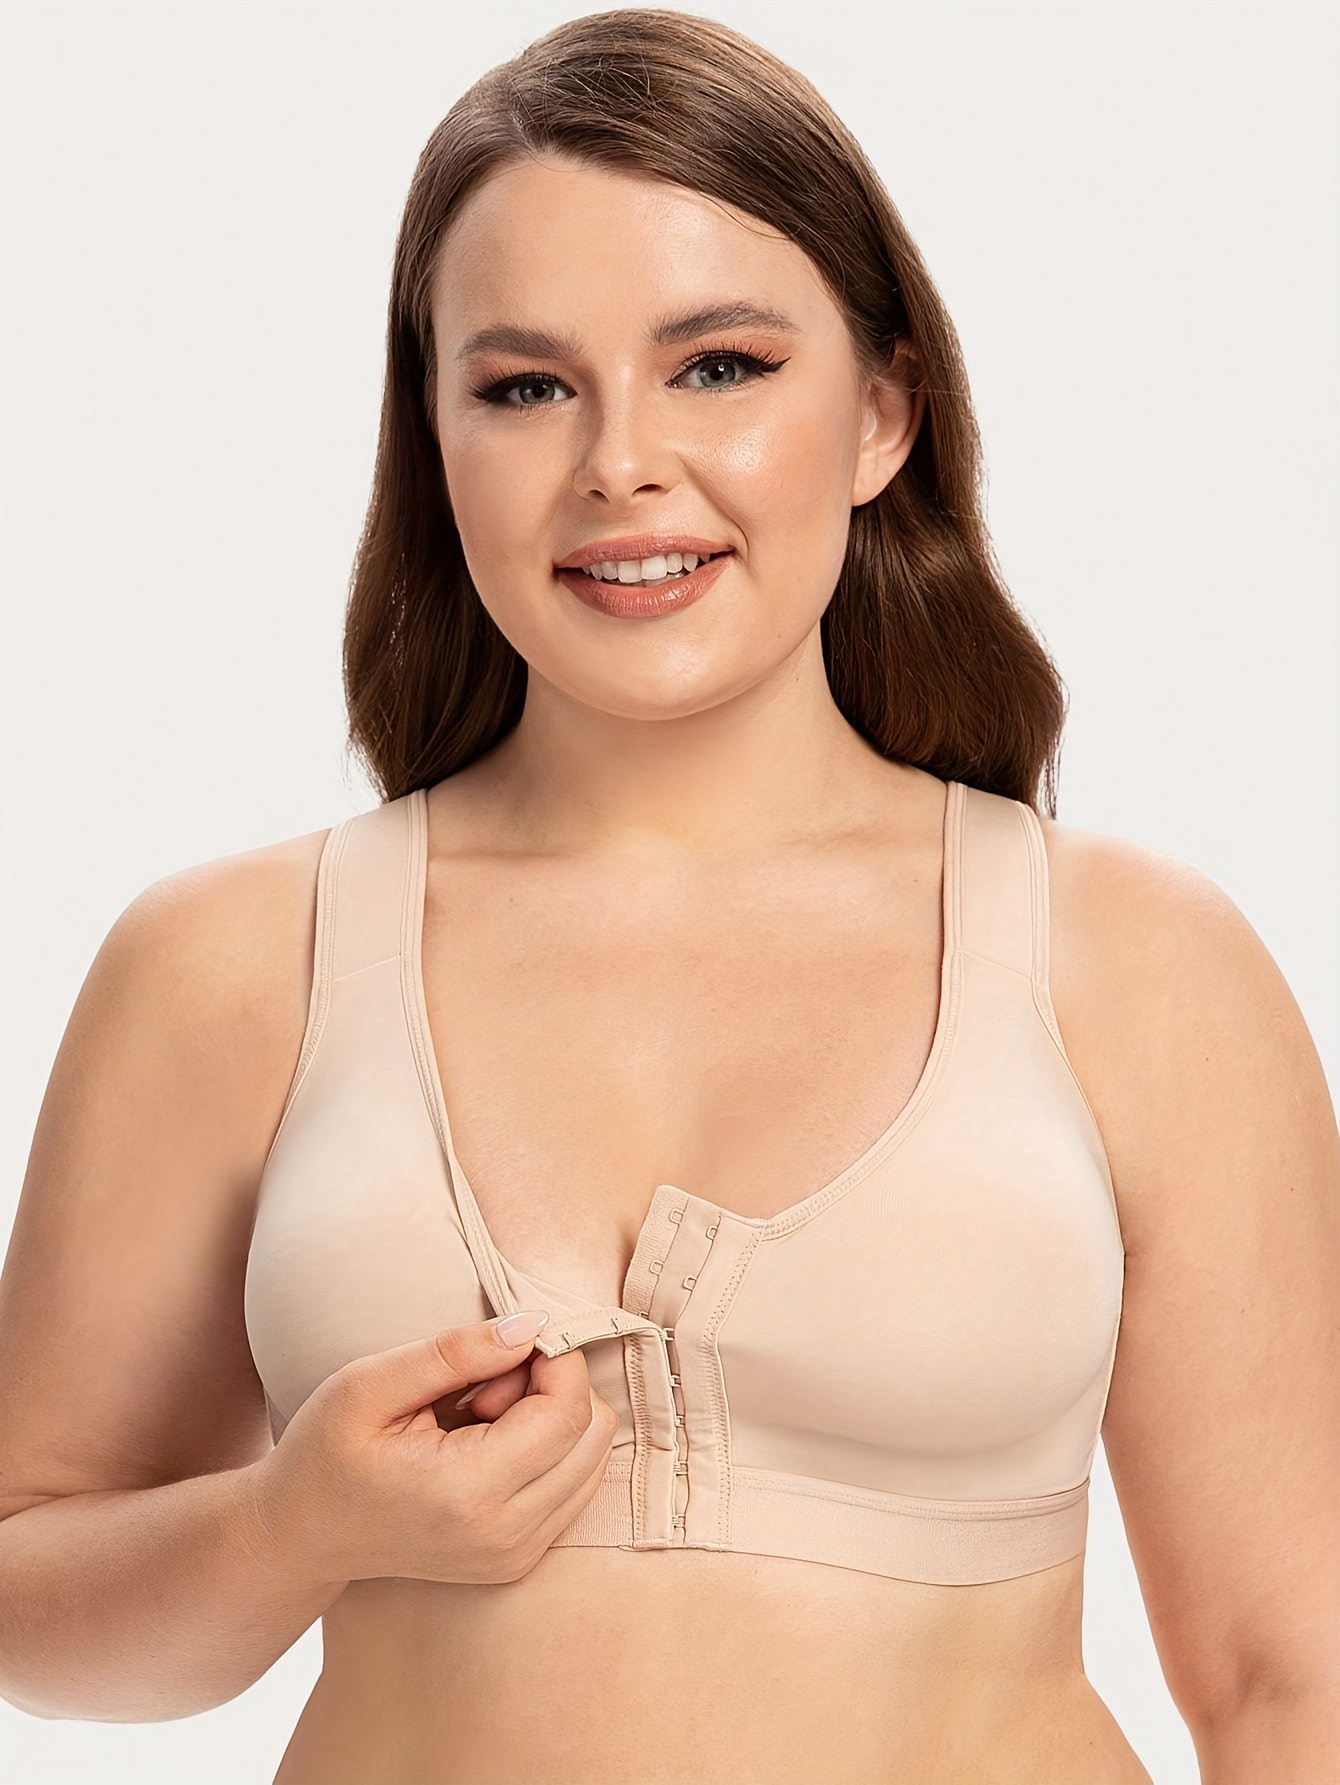 MELENECA Women's Front Closure Wirefree Post Surgery Plus Size